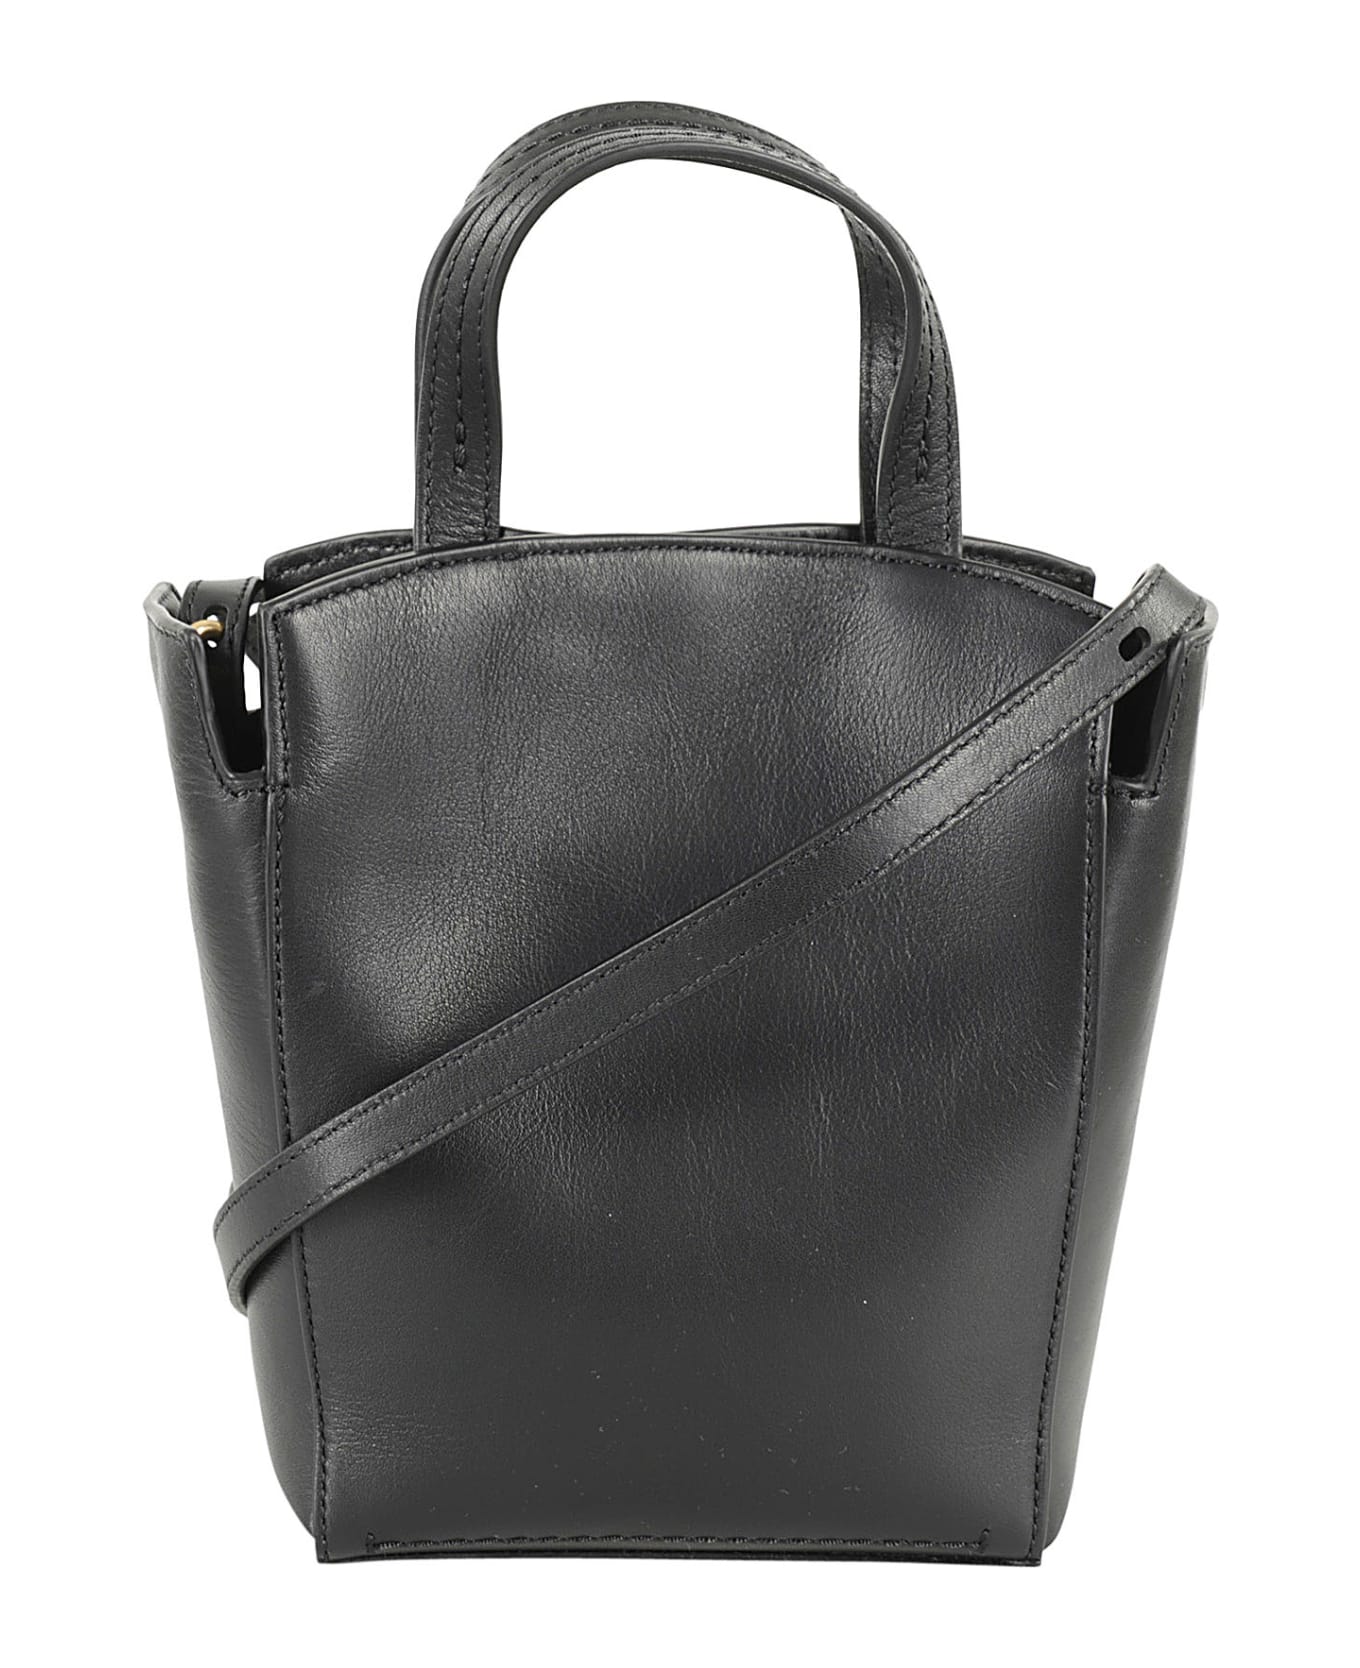 Mulberry Clovelly Mini Tote - Black